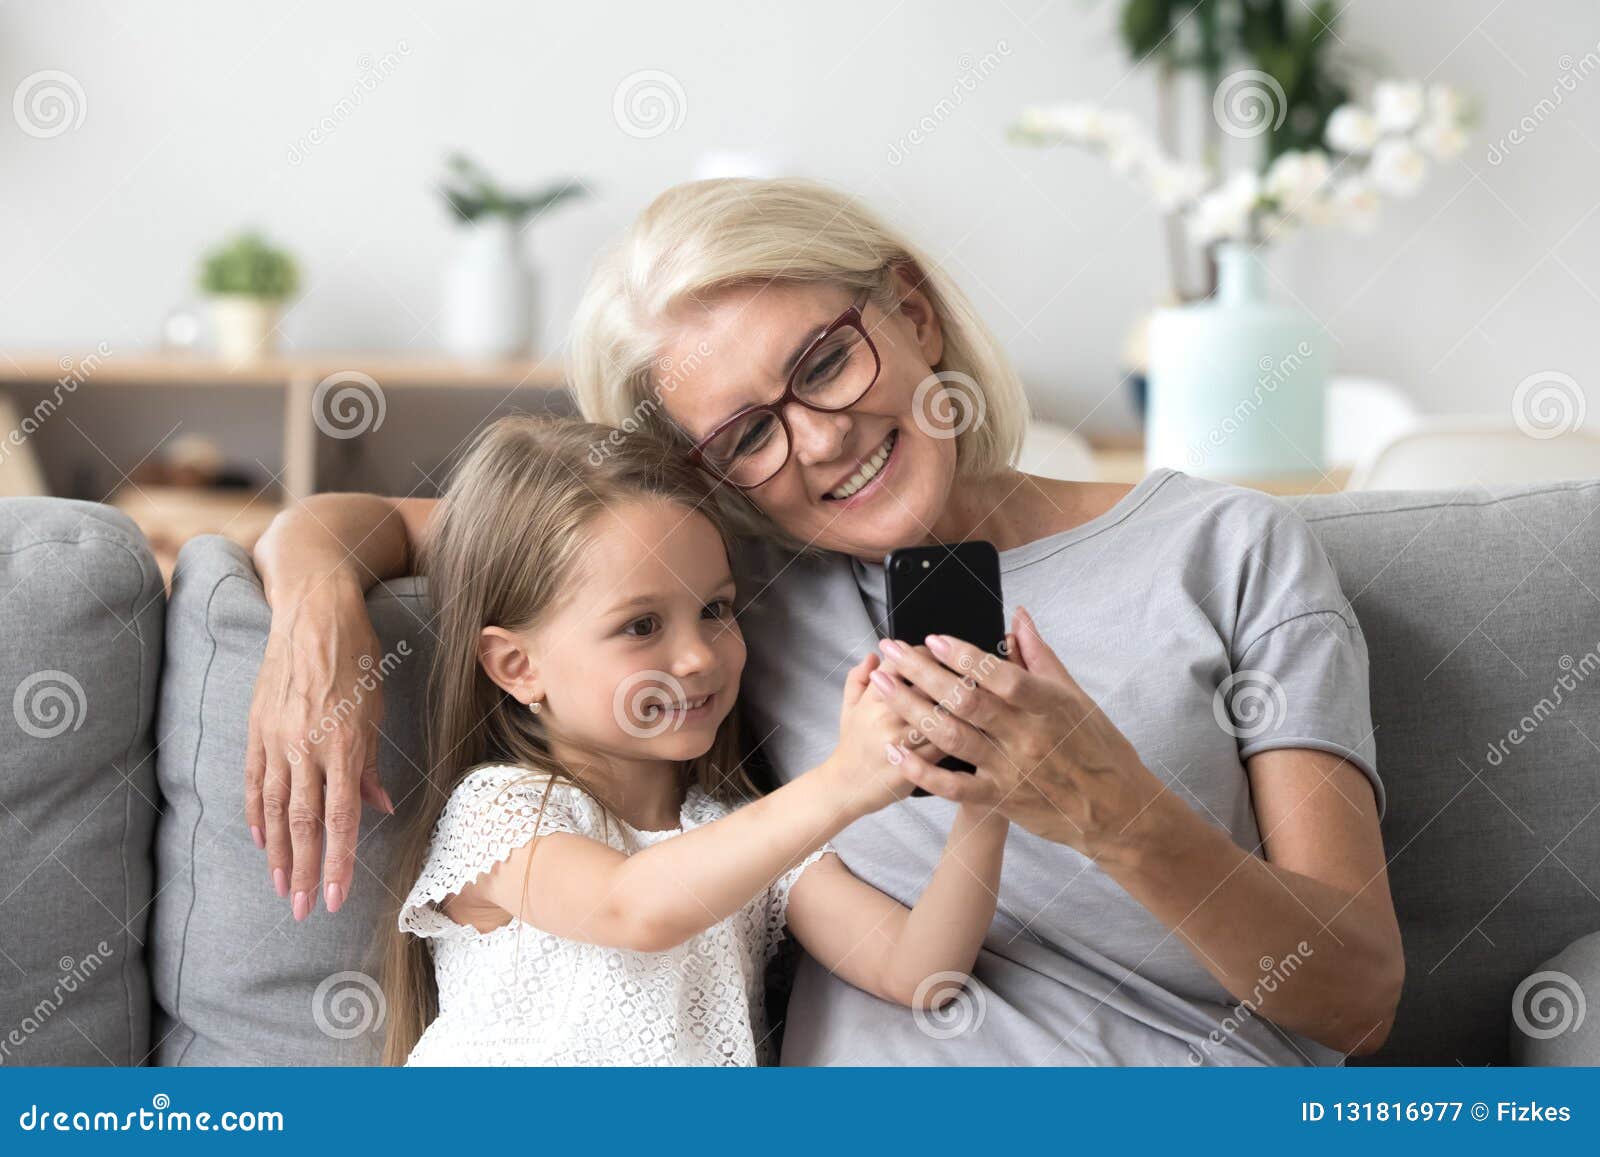 happy grandmother and cute granddaughter using cellphone making